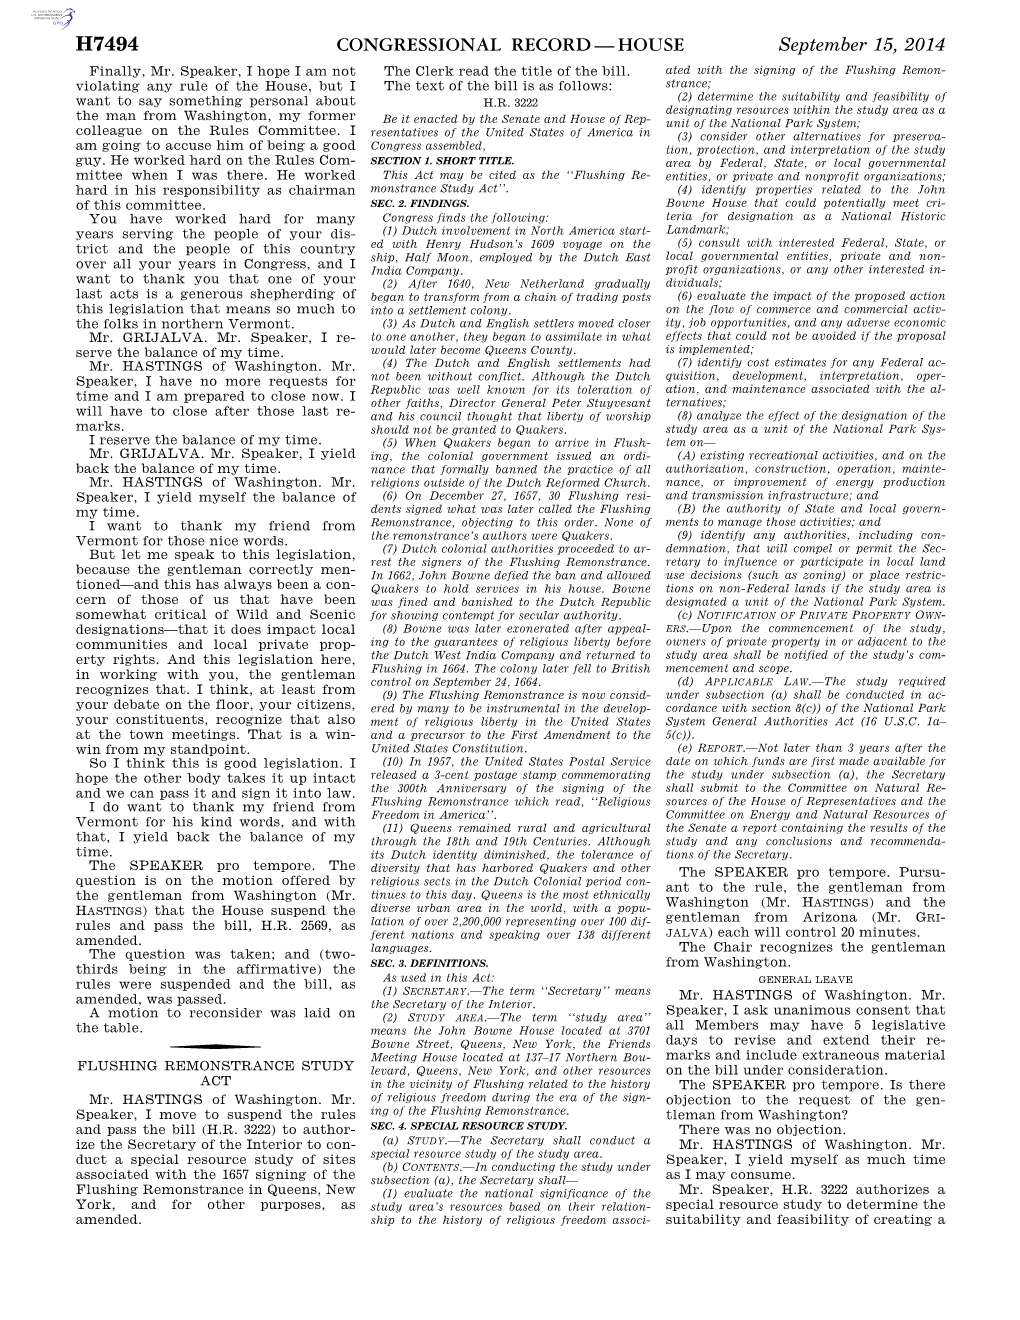 Congressional Record—House H7494